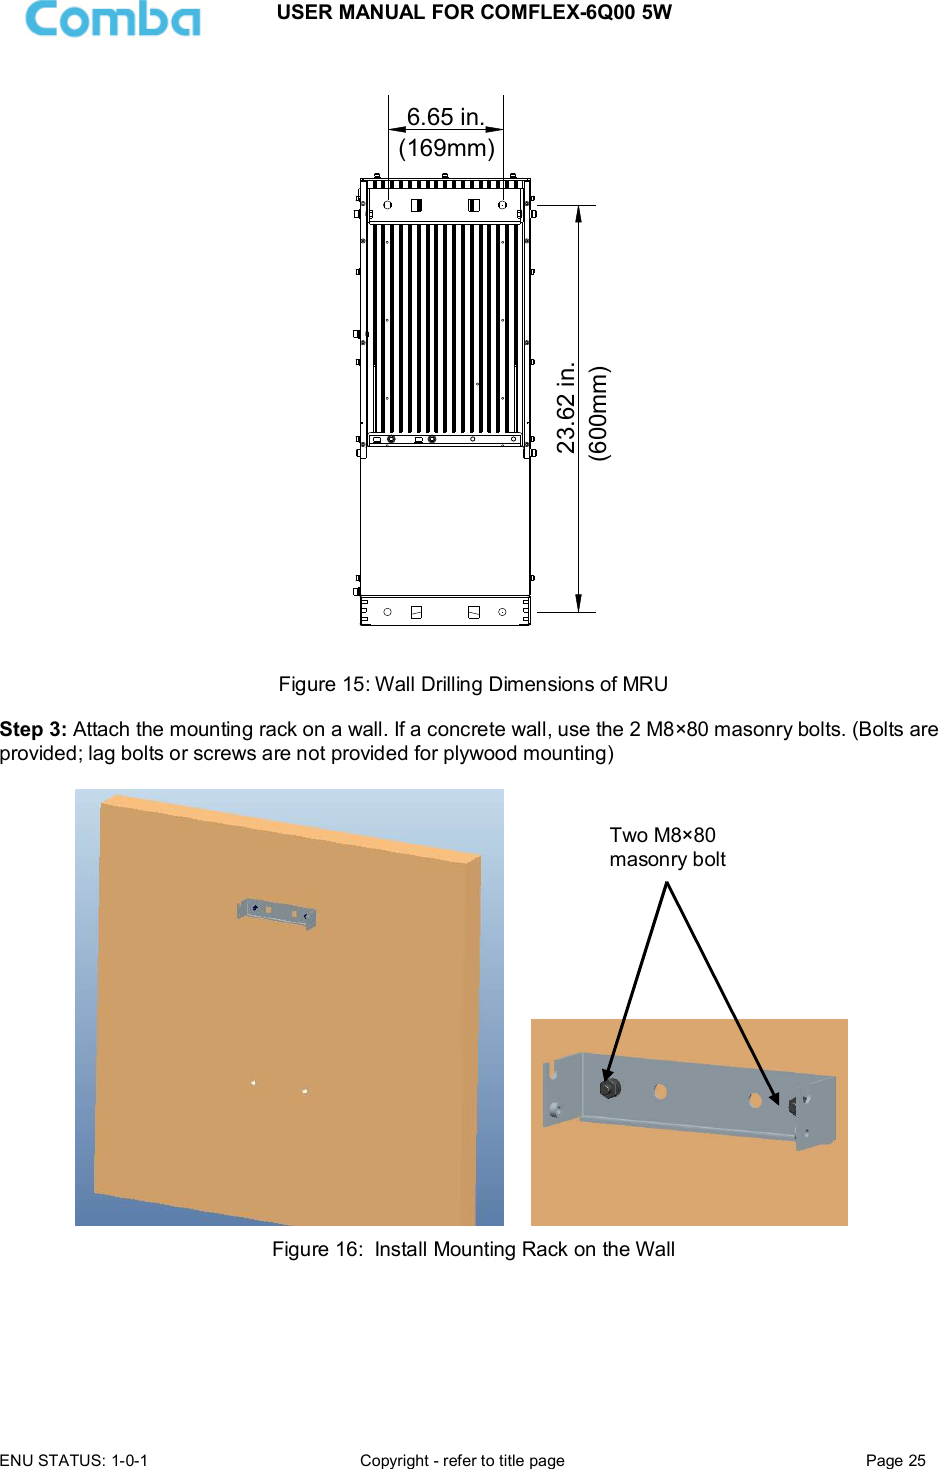 USER MANUAL FOR COMFLEX-6Q00 5W ENU STATUS: 1-0-1  Copyright - refer to title page  Page 25  23.62 in.6.65 in.(169mm)(600mm) Figure 15: Wall Drilling Dimensions of MRU  Step 3: Attach the mounting rack on a wall. If a concrete wall, use the 2 M8×80 masonry bolts. (Bolts are provided; lag bolts or screws are not provided for plywood mounting)        Figure 16:  Install Mounting Rack on the Wall     Two M8×80 masonry bolt 